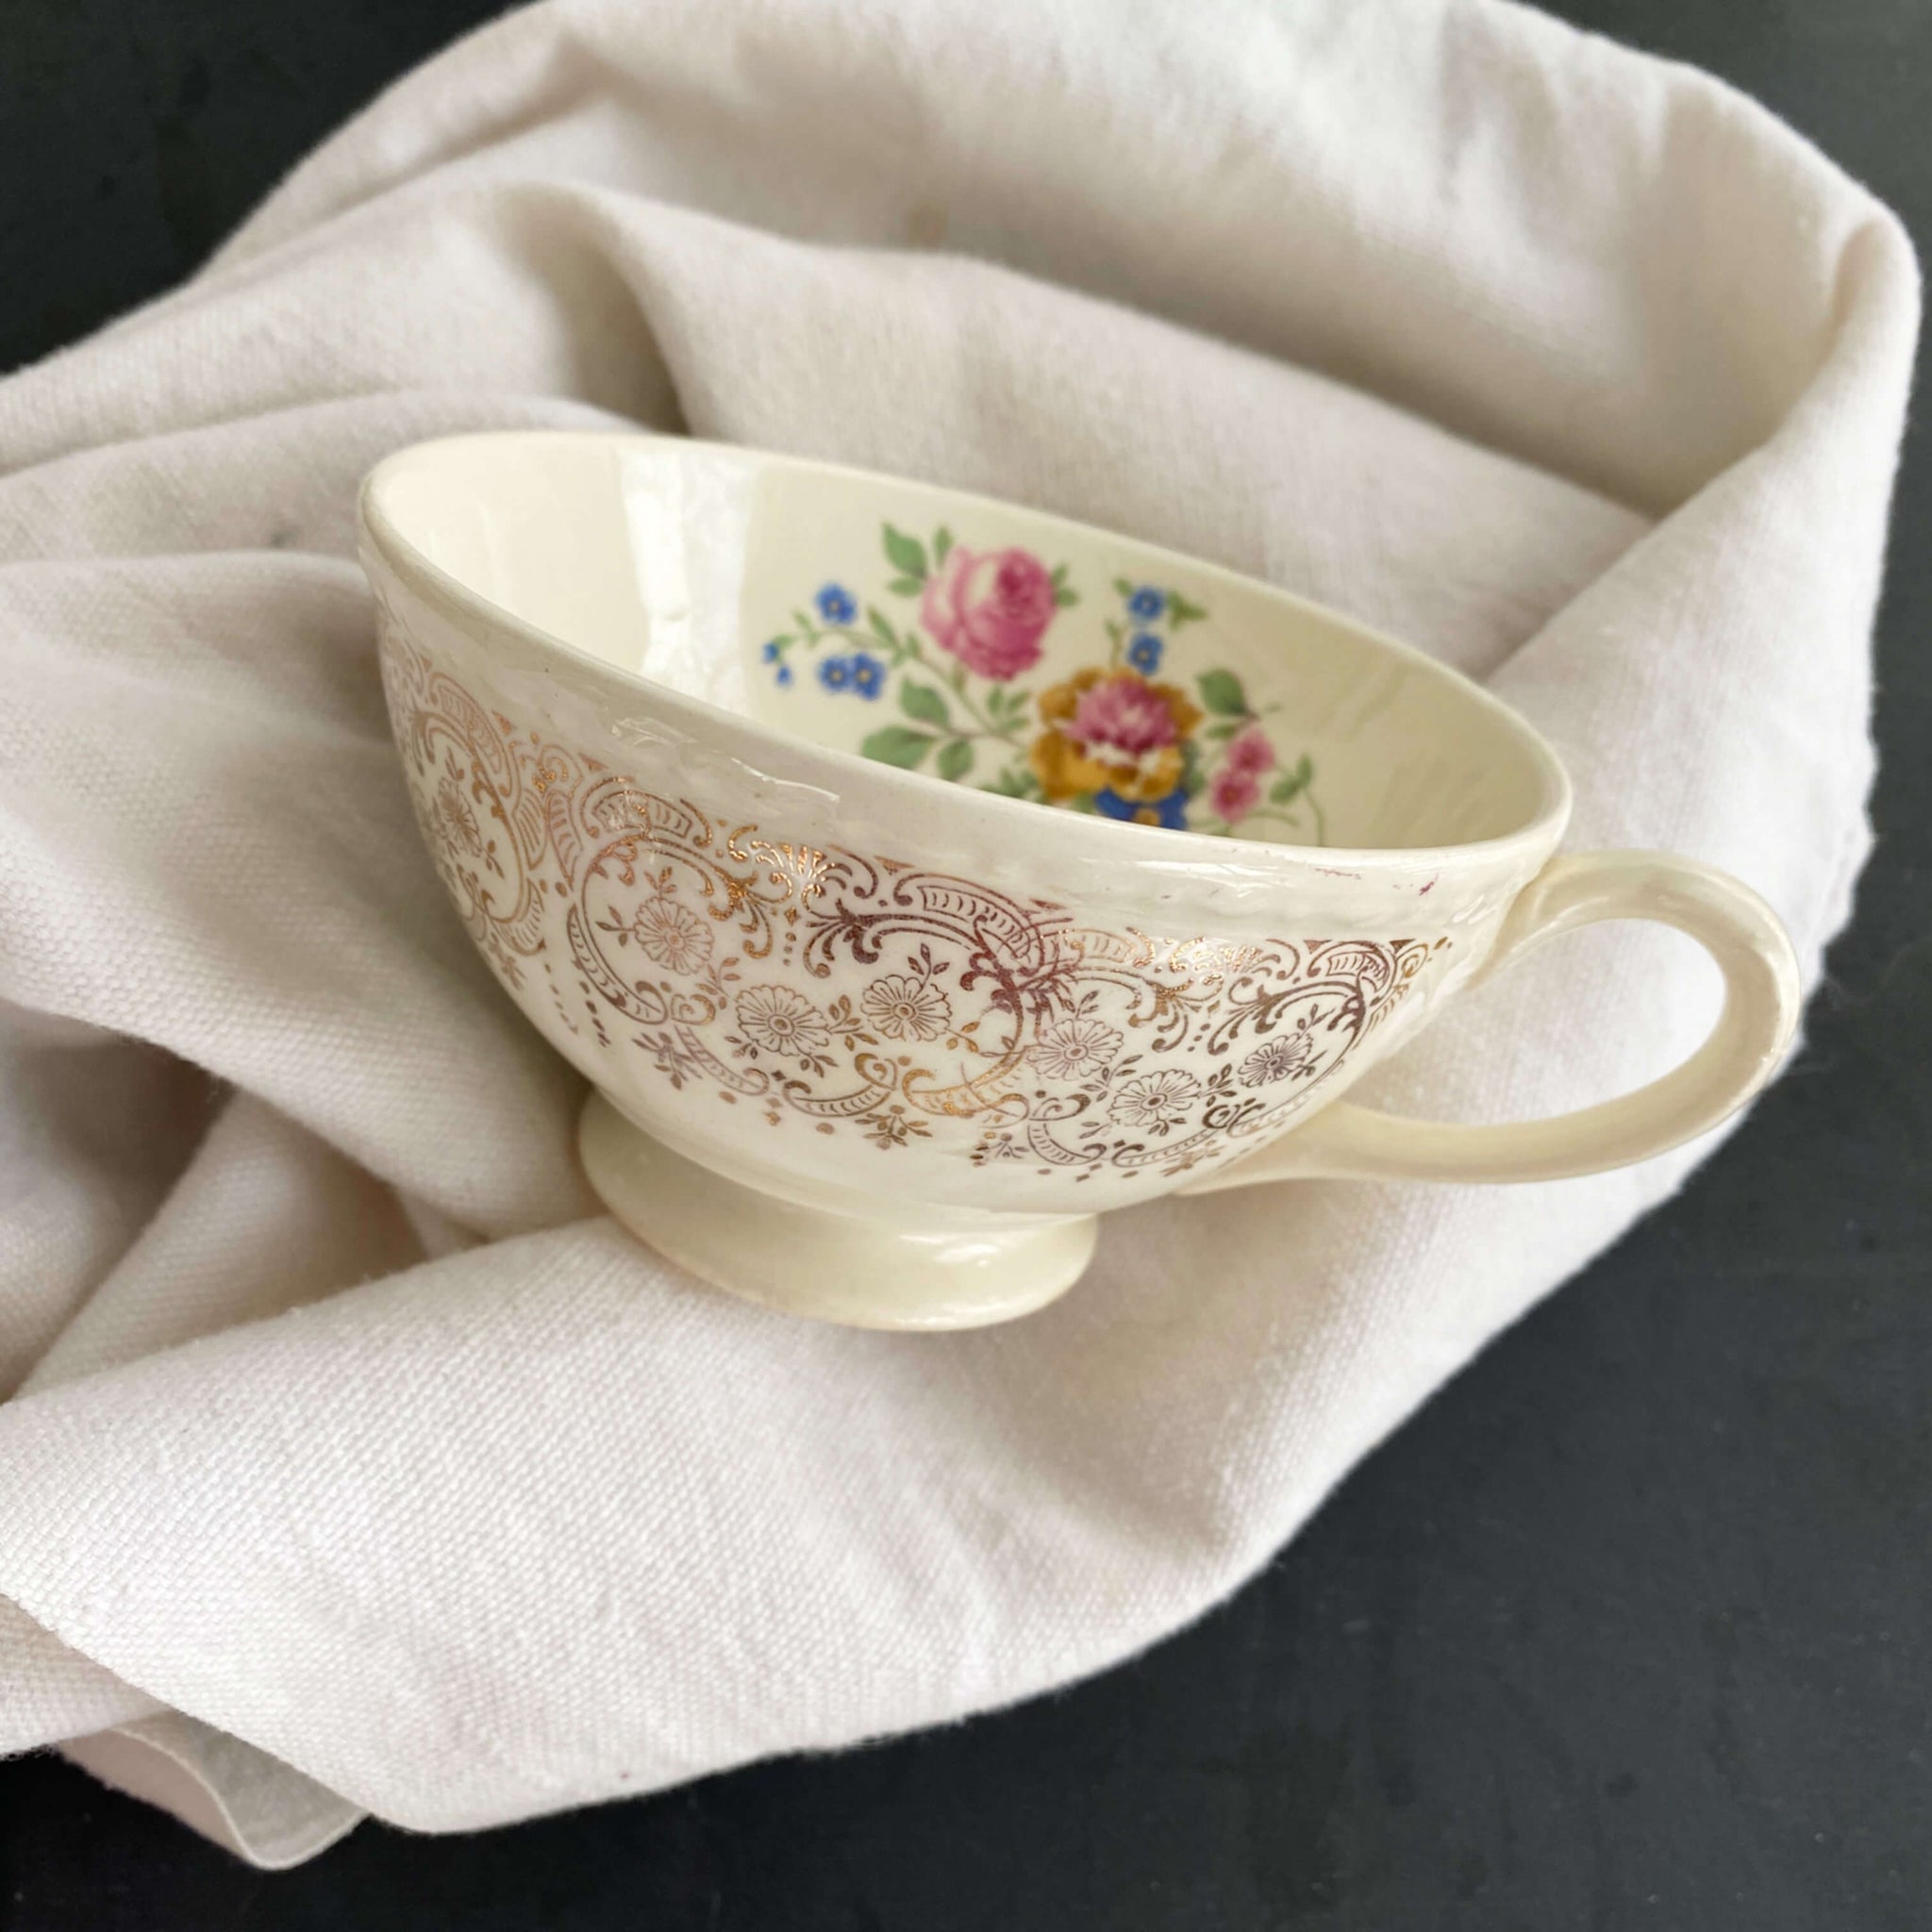 Vinatge Floral Teacups with Gold Filigree - Set of Two circa 1940s